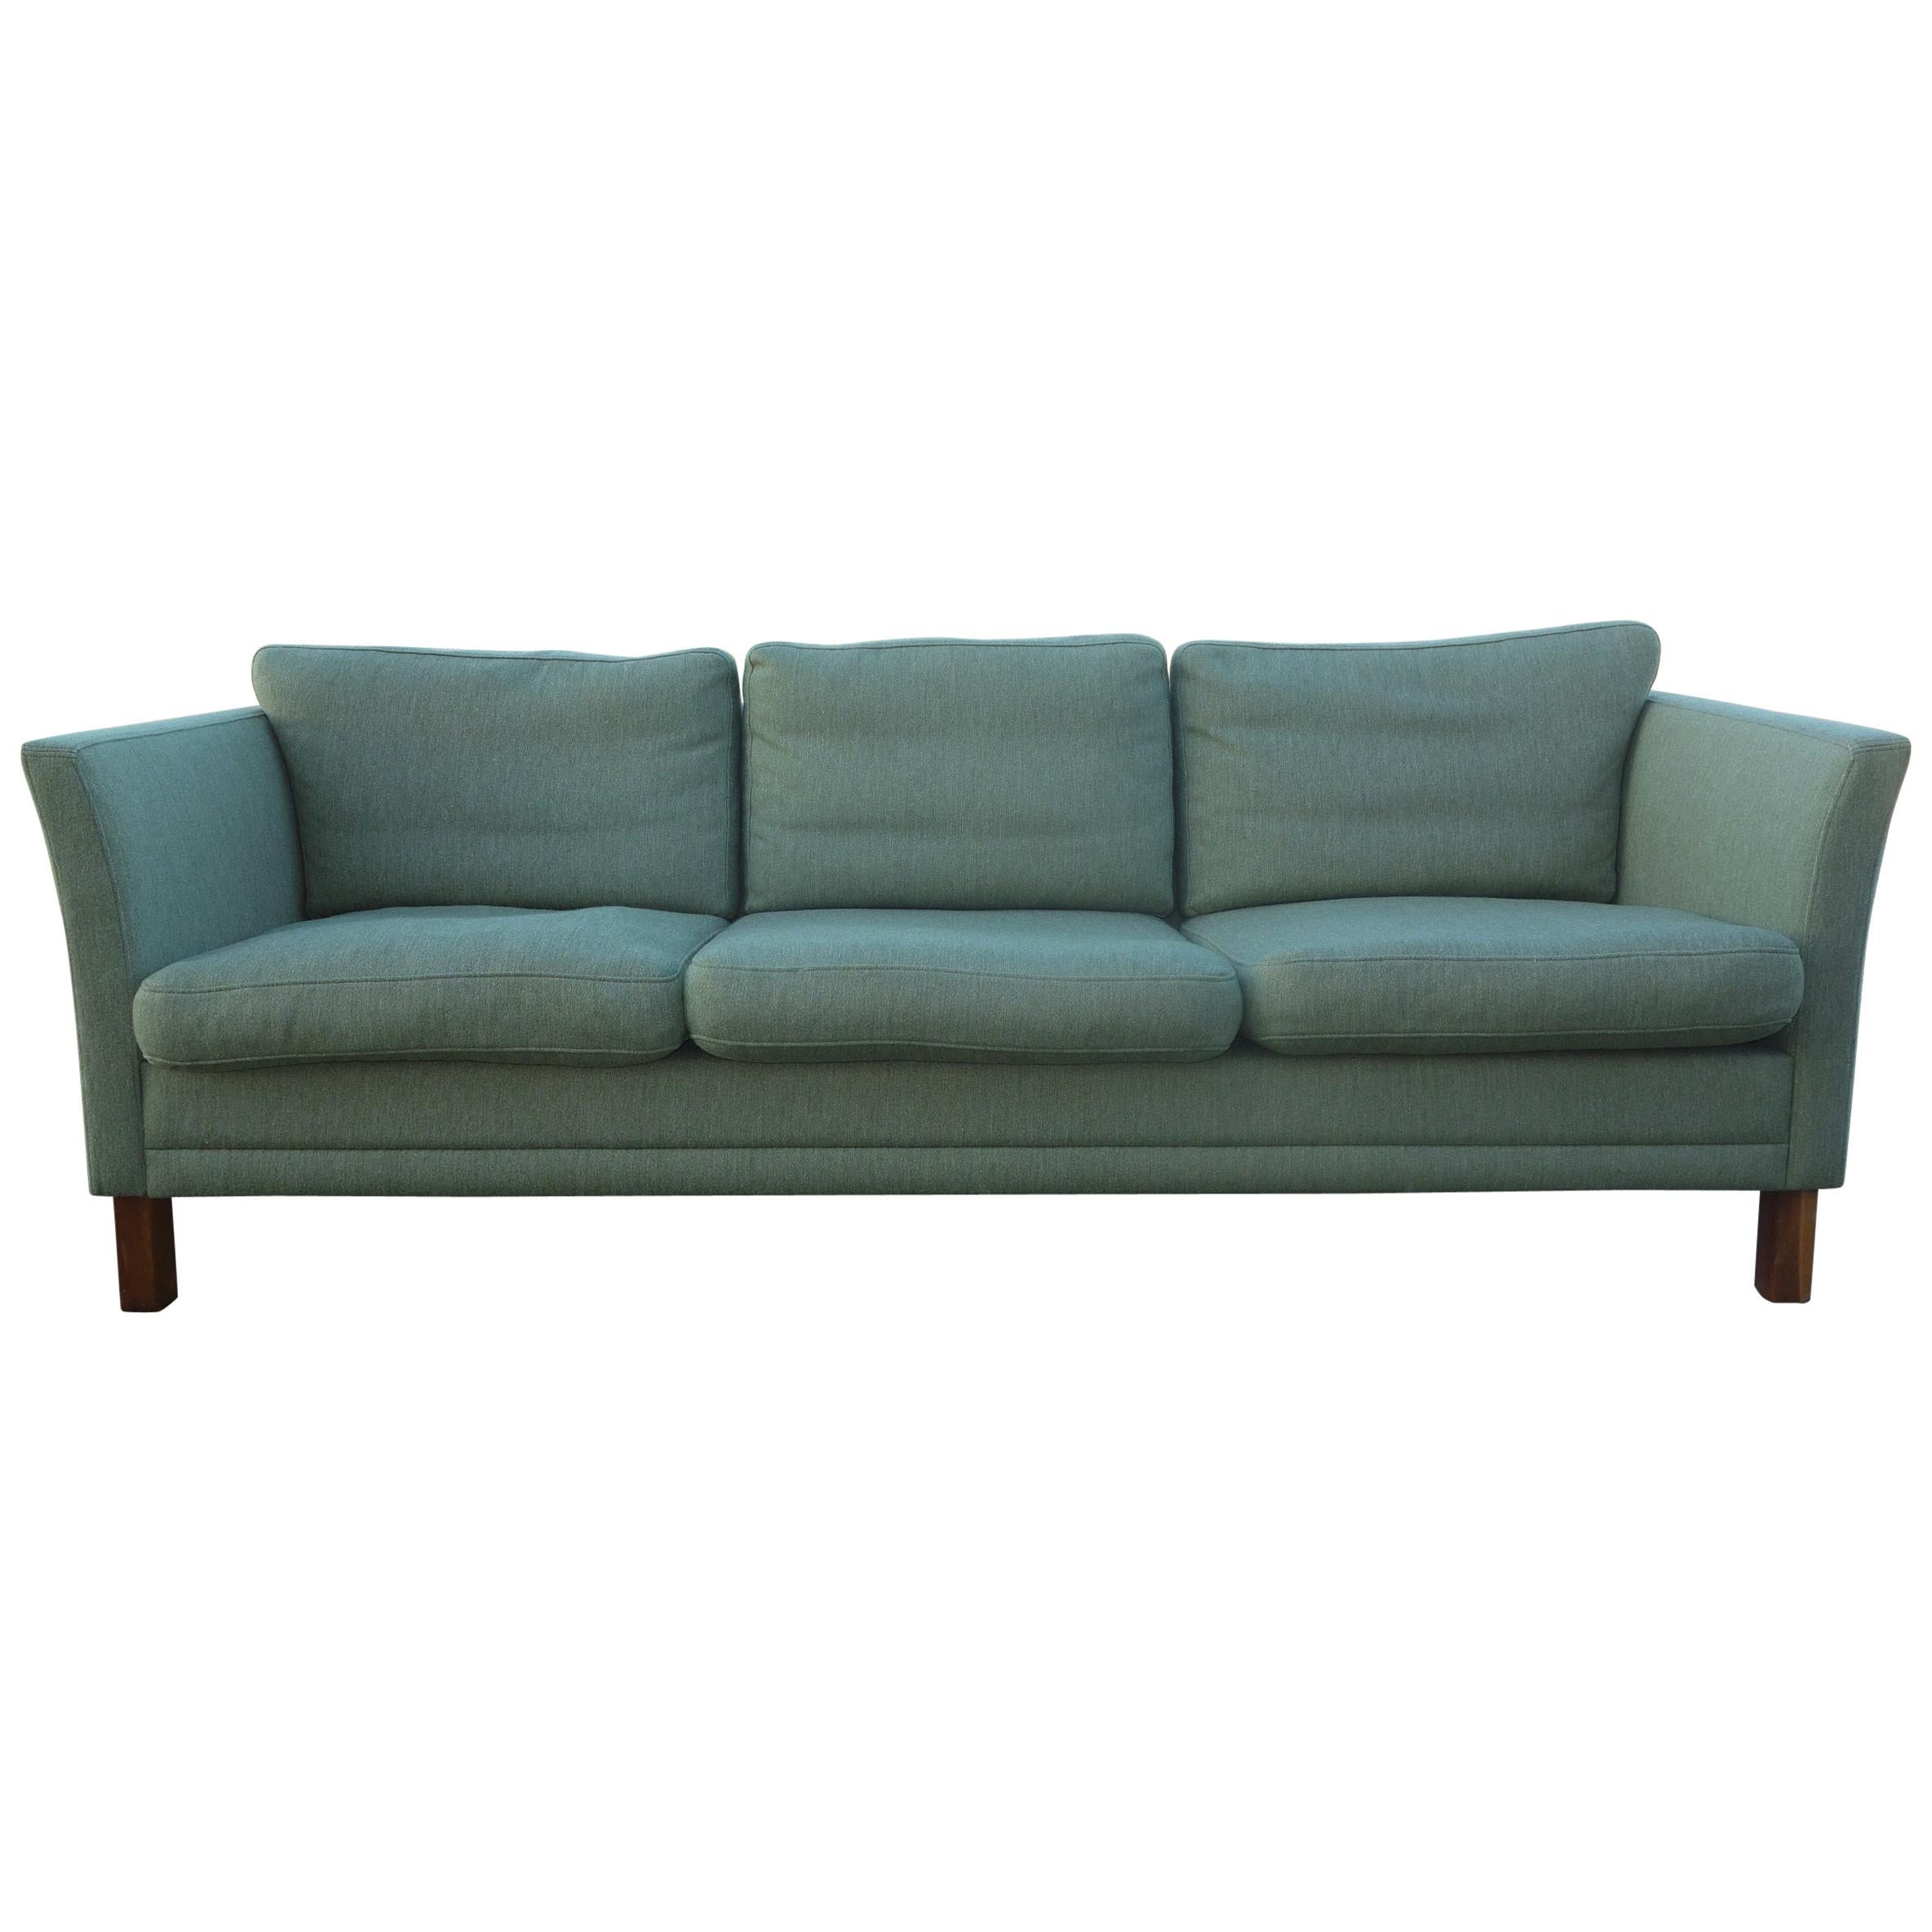 Danish Sofa in Classic Børge Mogensen, Kaare Klint Style, Wool and Down Filling For Sale